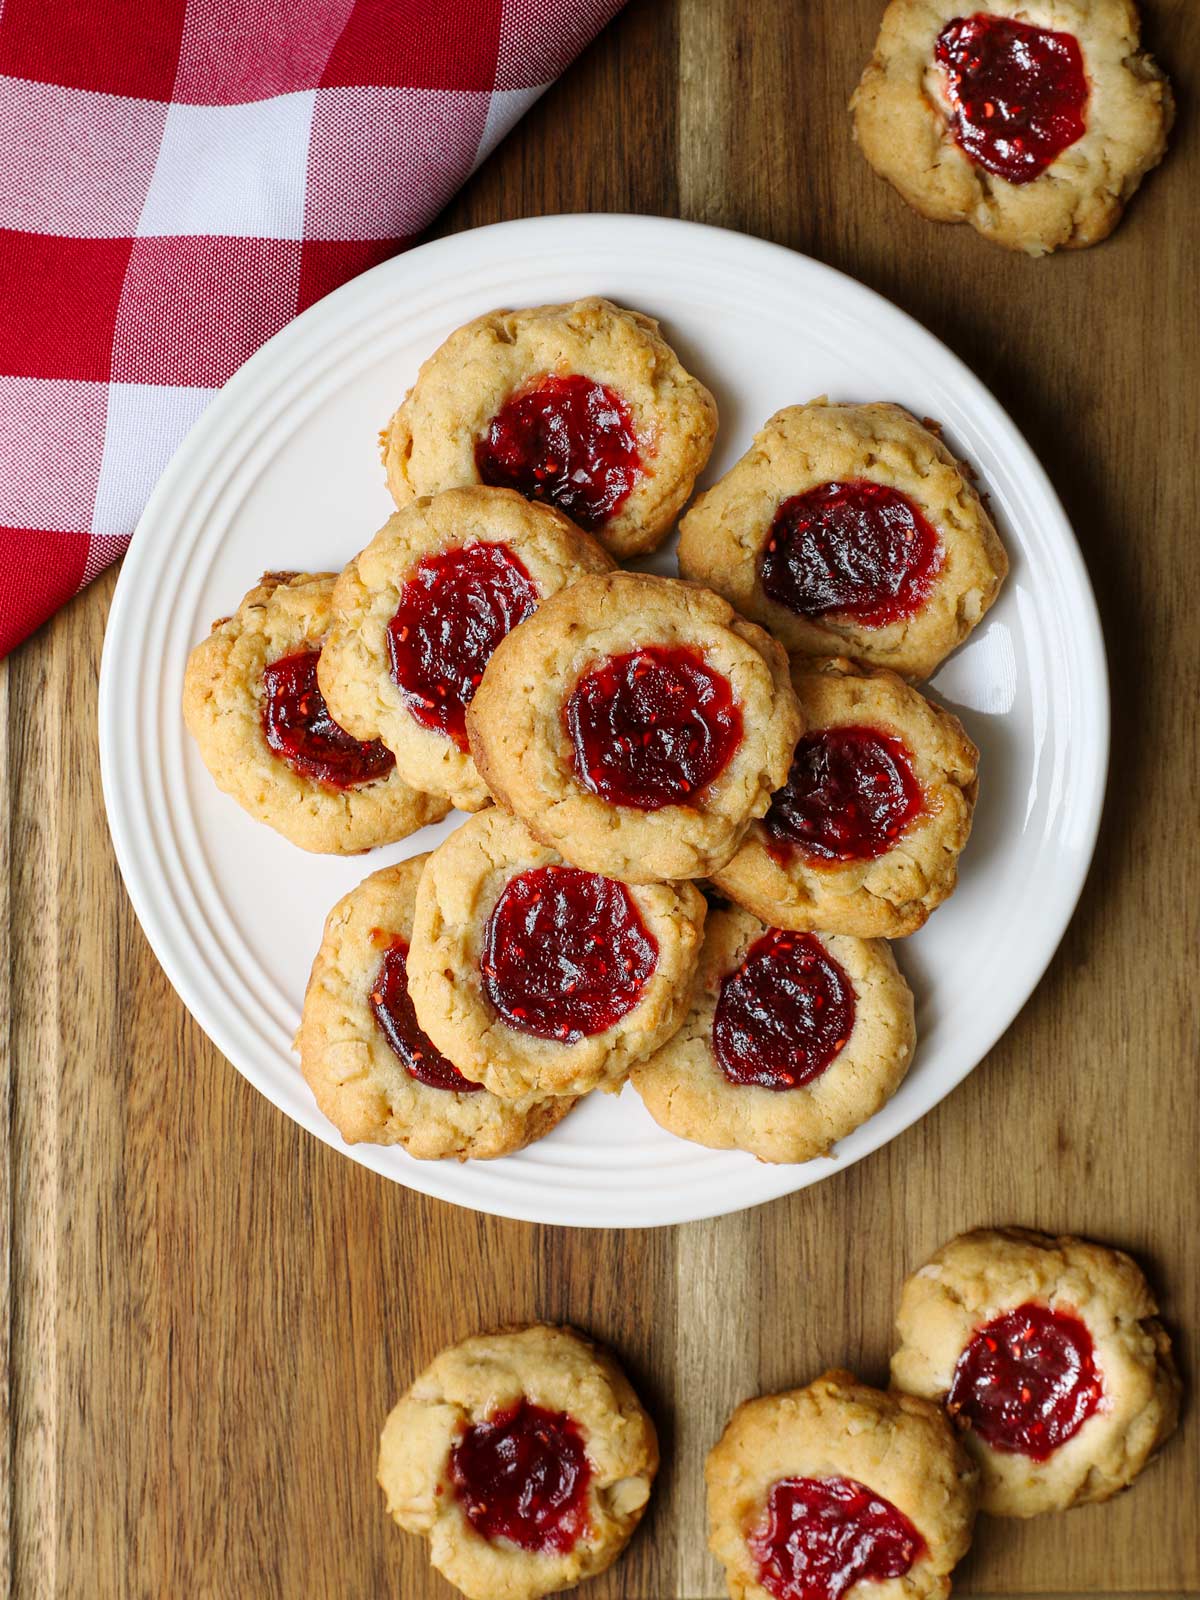 plate of raspberry thumbprint cookies on a wood board with more cookies and a red checked cloth.